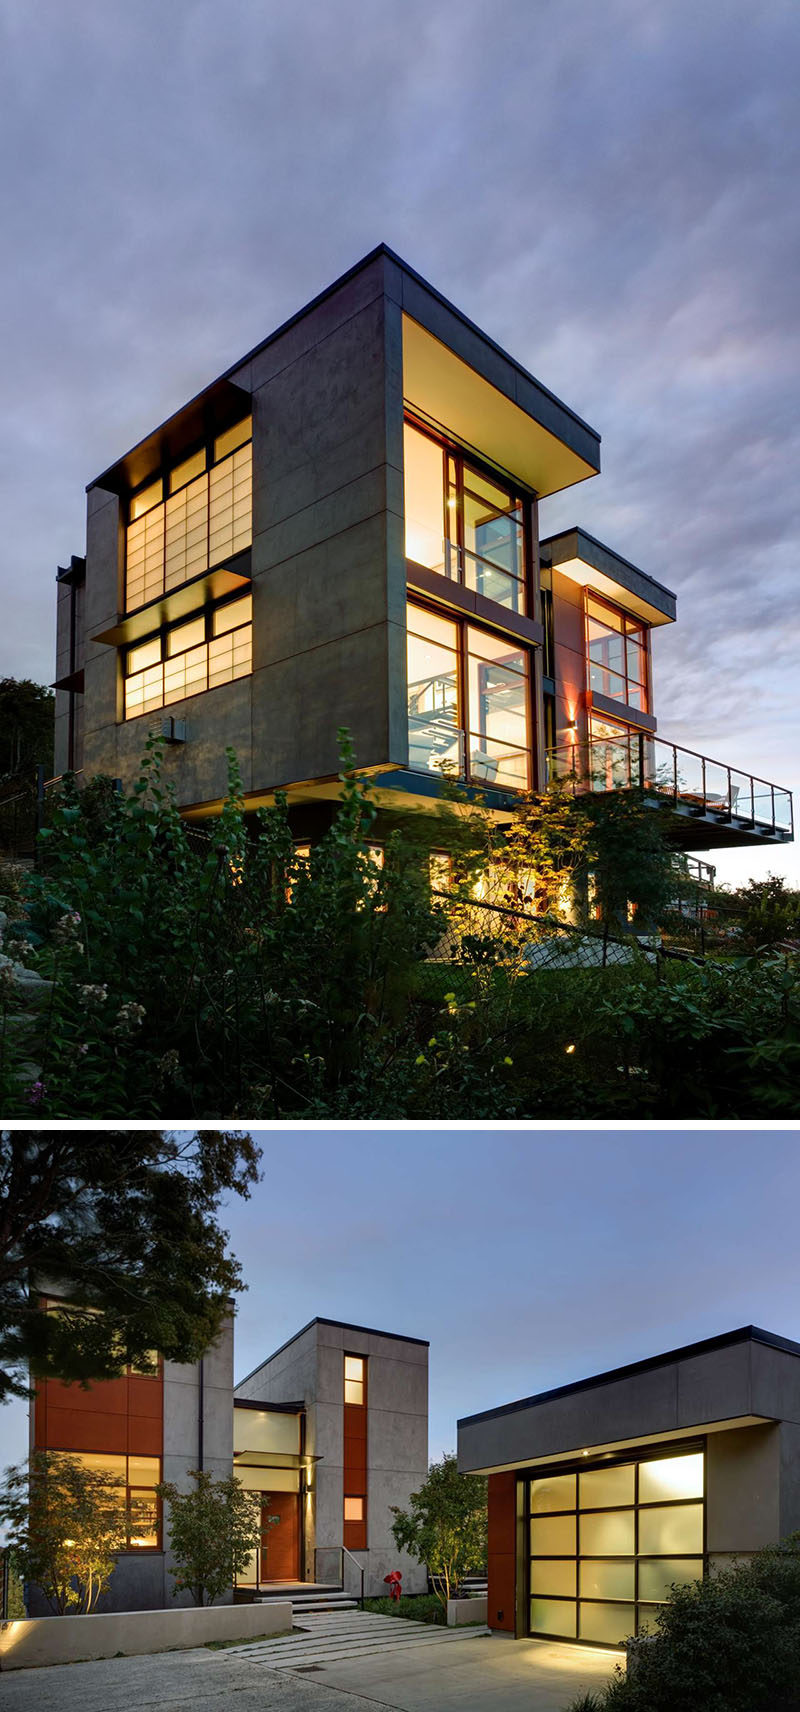 20 Awesome Examples Of Pacific Northwest Architecture // Lots of concrete on the exterior of this home give it an industrial feel while large windows and deep over hangs give it a Pacific Northwest look.